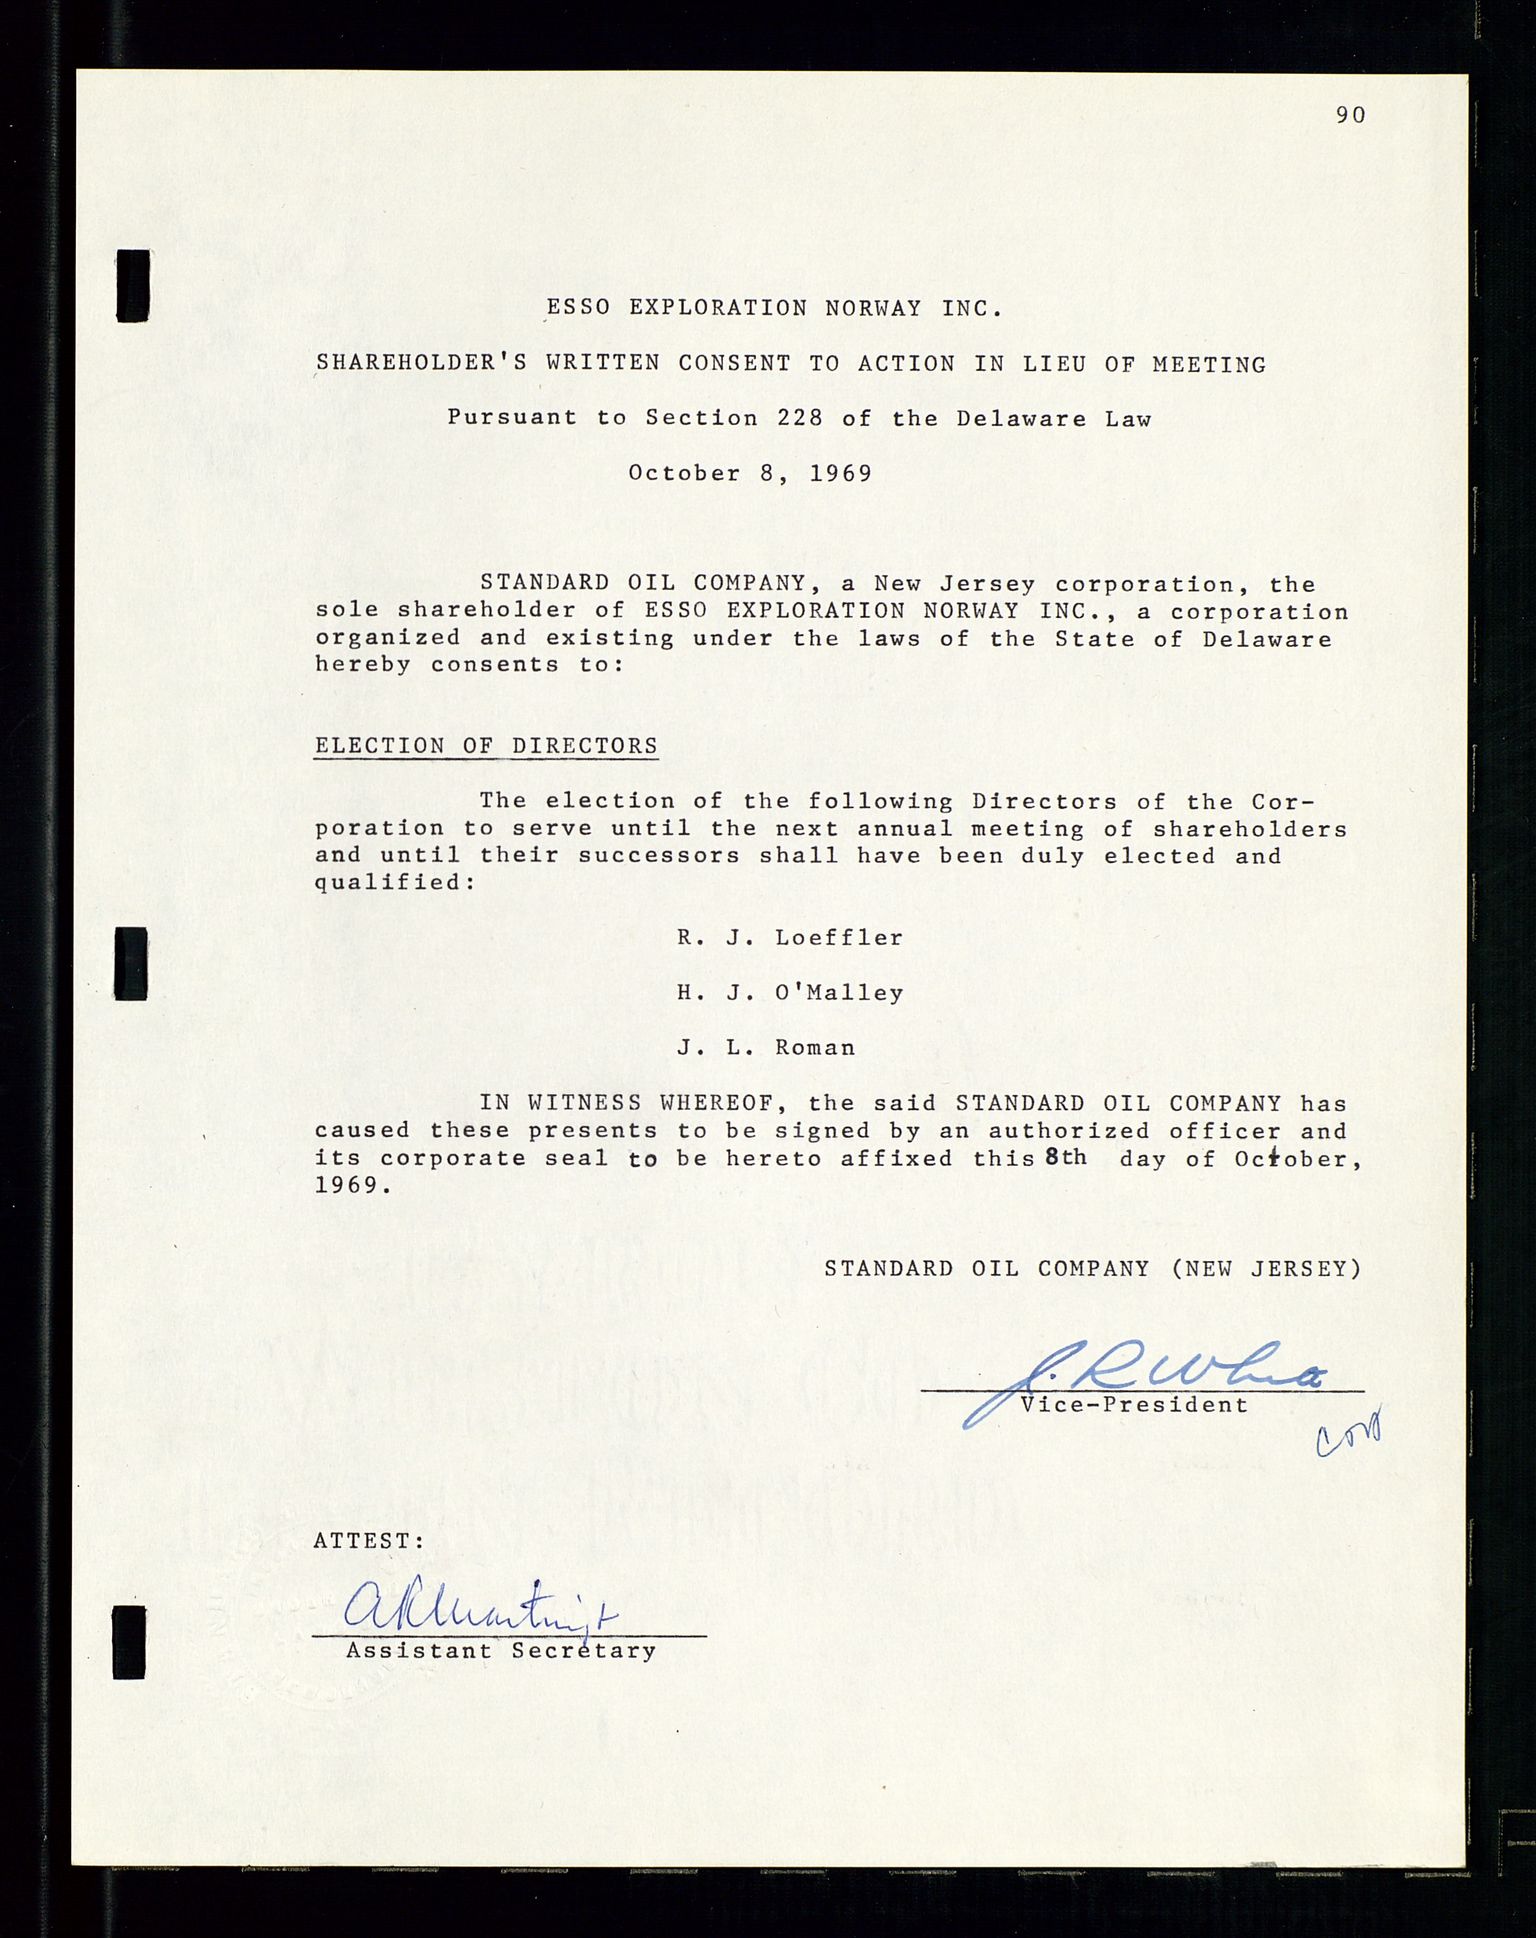 Pa 1512 - Esso Exploration and Production Norway Inc., SAST/A-101917/A/Aa/L0001/0001: Styredokumenter / Corporate records, By-Laws, Board meeting minutes, Incorporations, 1965-1975, s. 90